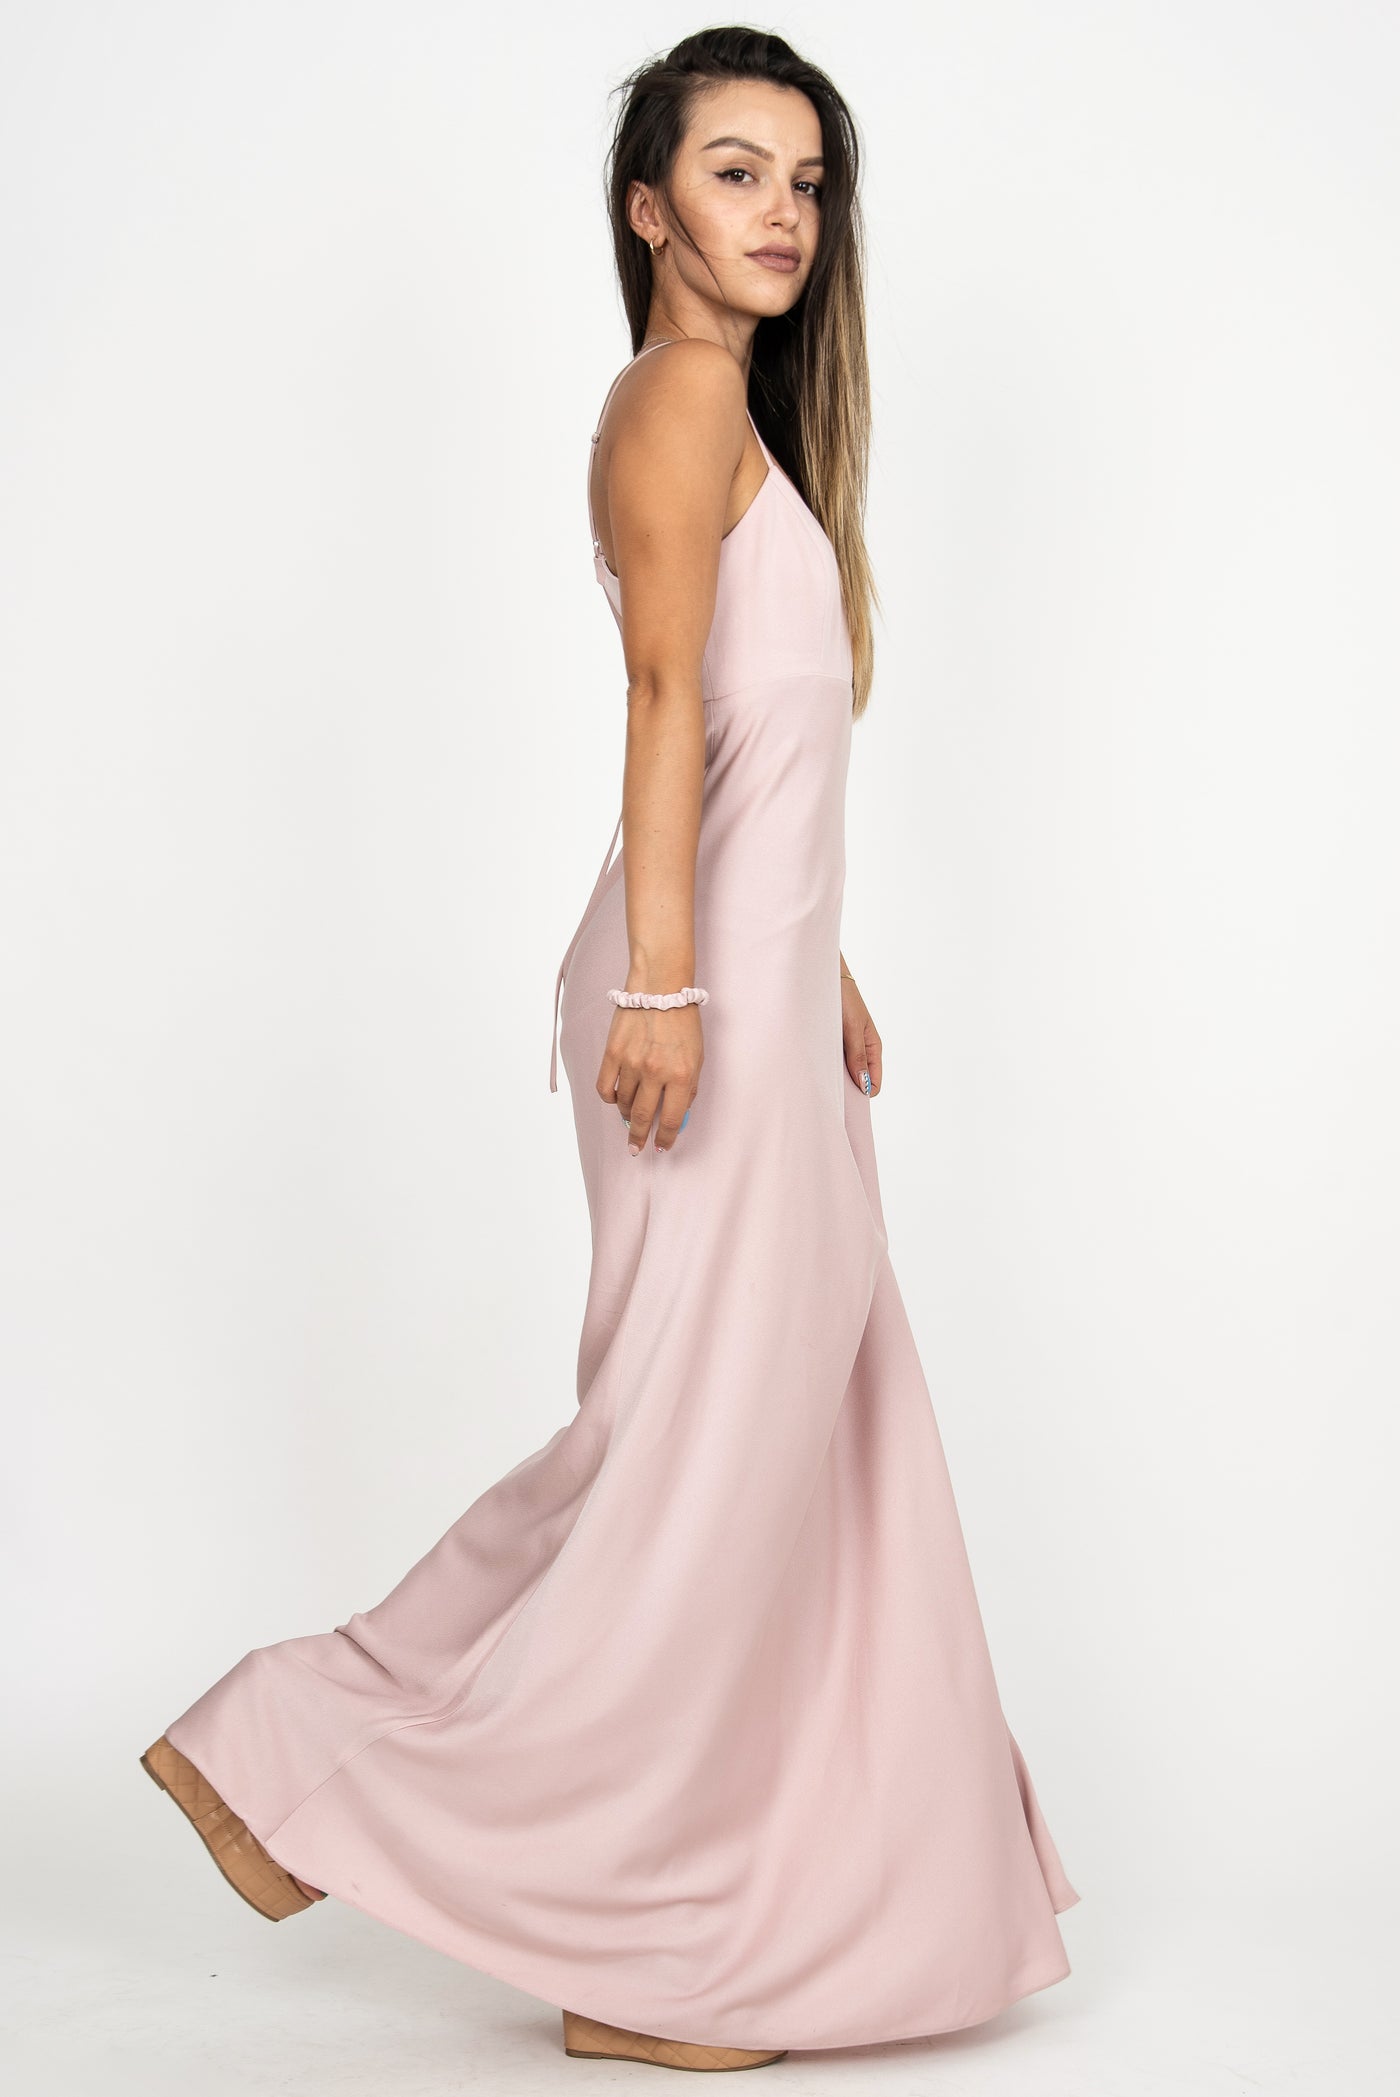 Elegant flowing dress with open back F2325